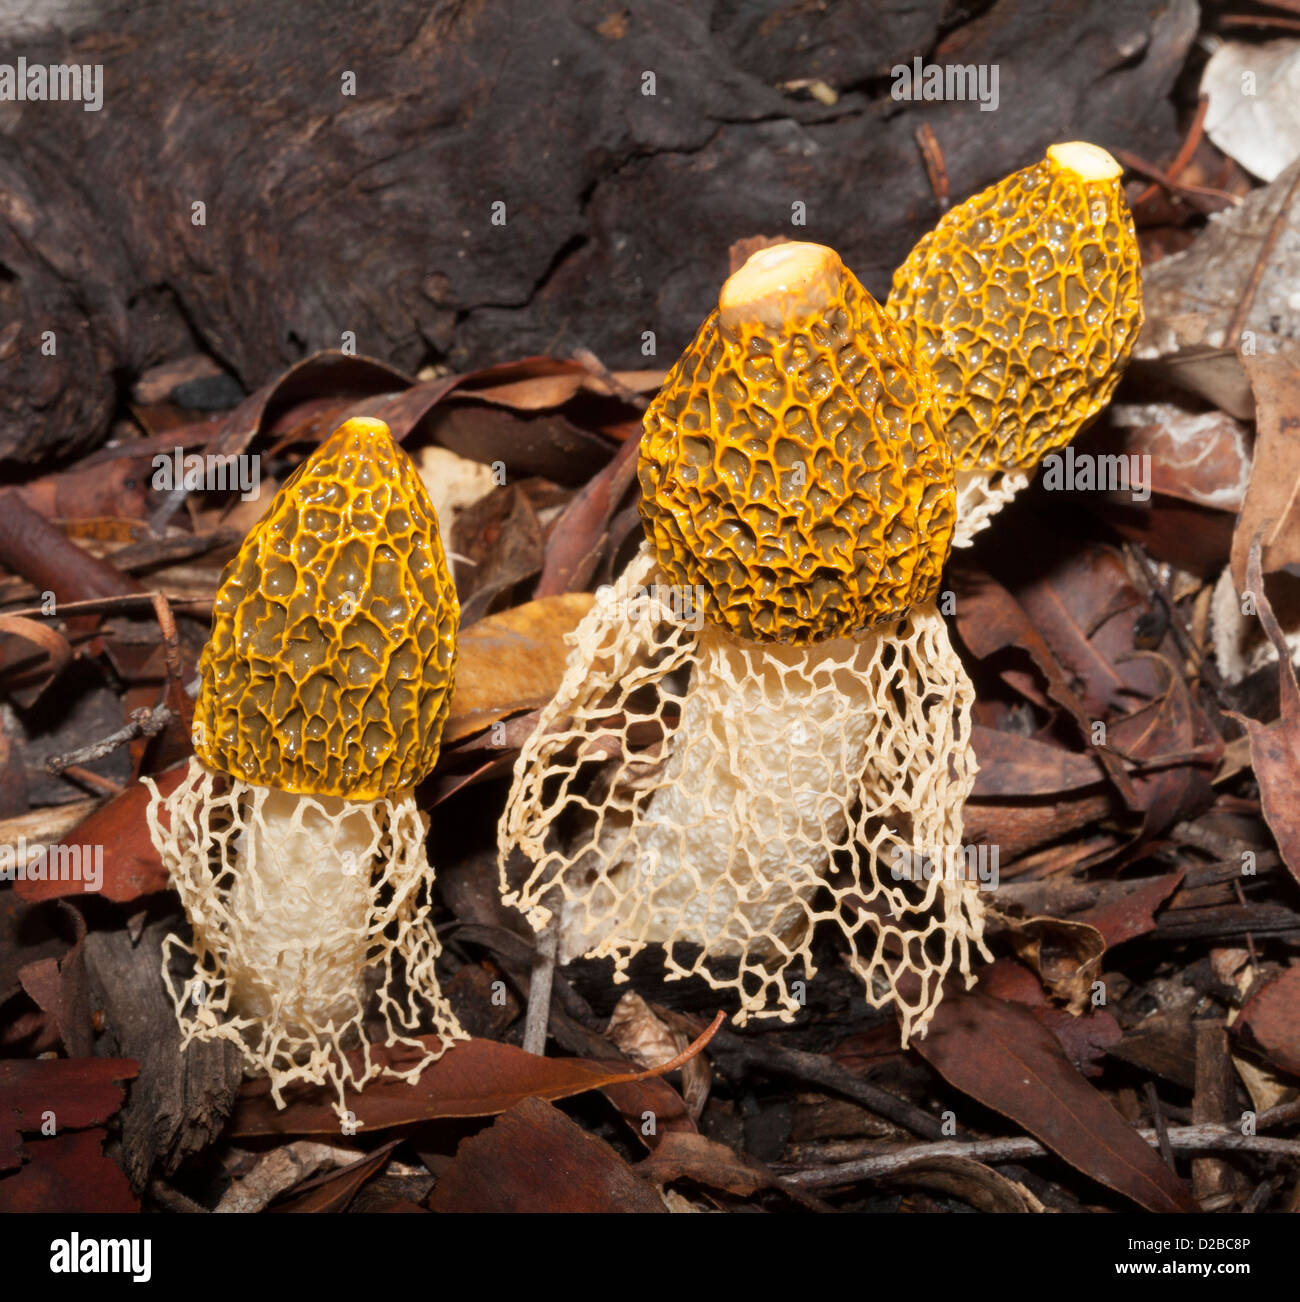 Group of beautiful stinkhorn fungi - Phallus multicolor - among decaying leaves in forest / woodland garden Stock Photo